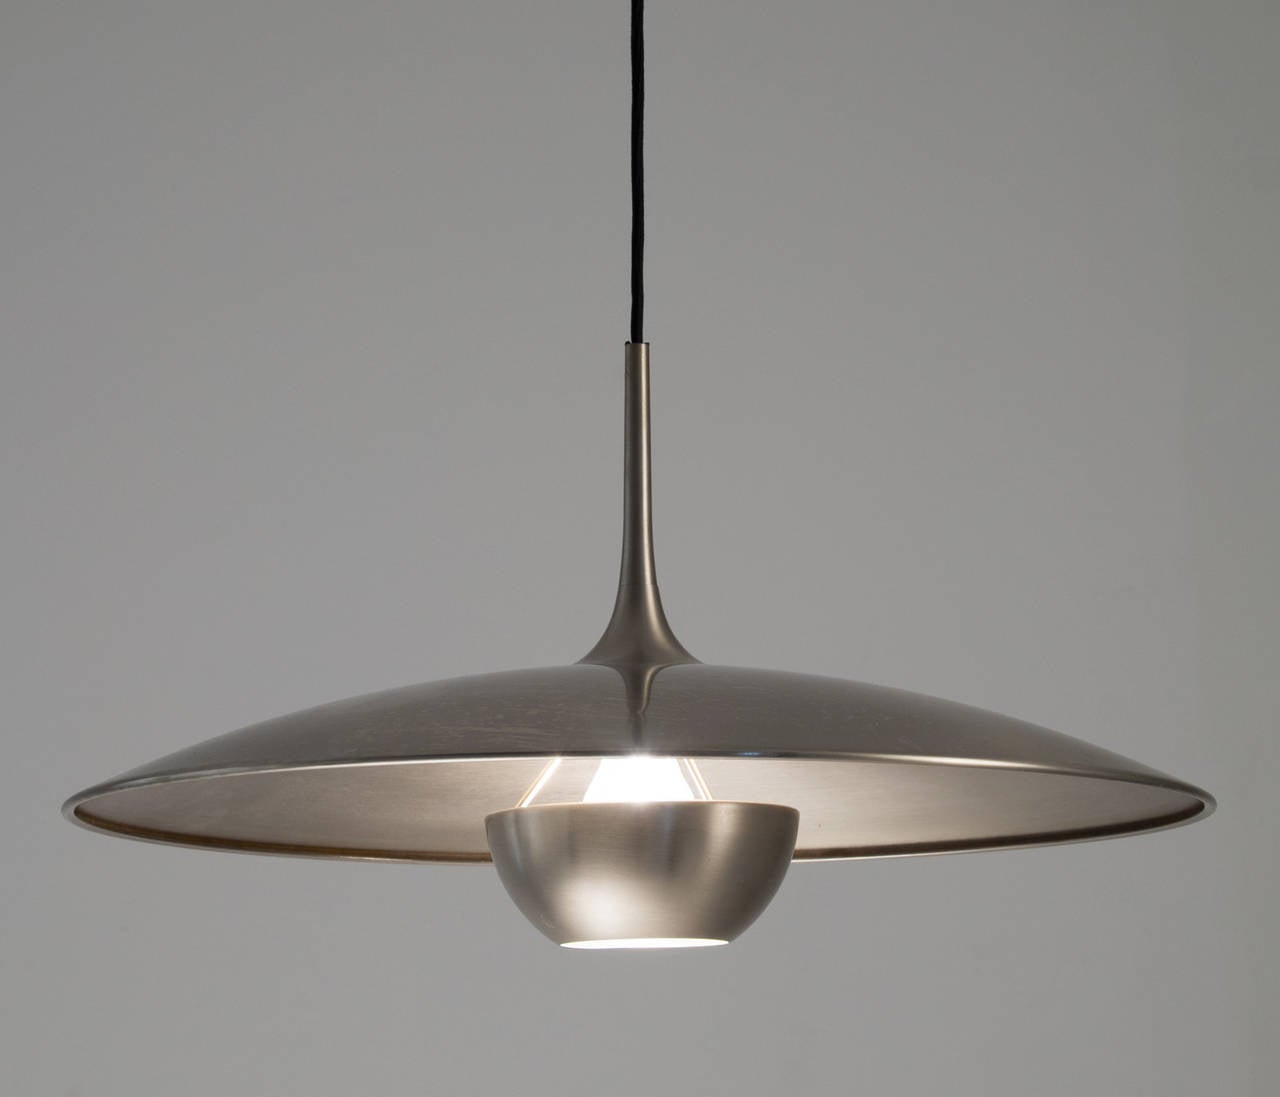 Pendant model Onos 55, in metal, by Florian Schulz, Germany, 1970s. 

Very elegantly shaped pendant designed by German designer Florian Schulz. Minimal and modern pendant with nice fluent lines. This high quality metal pendant is equipped with a